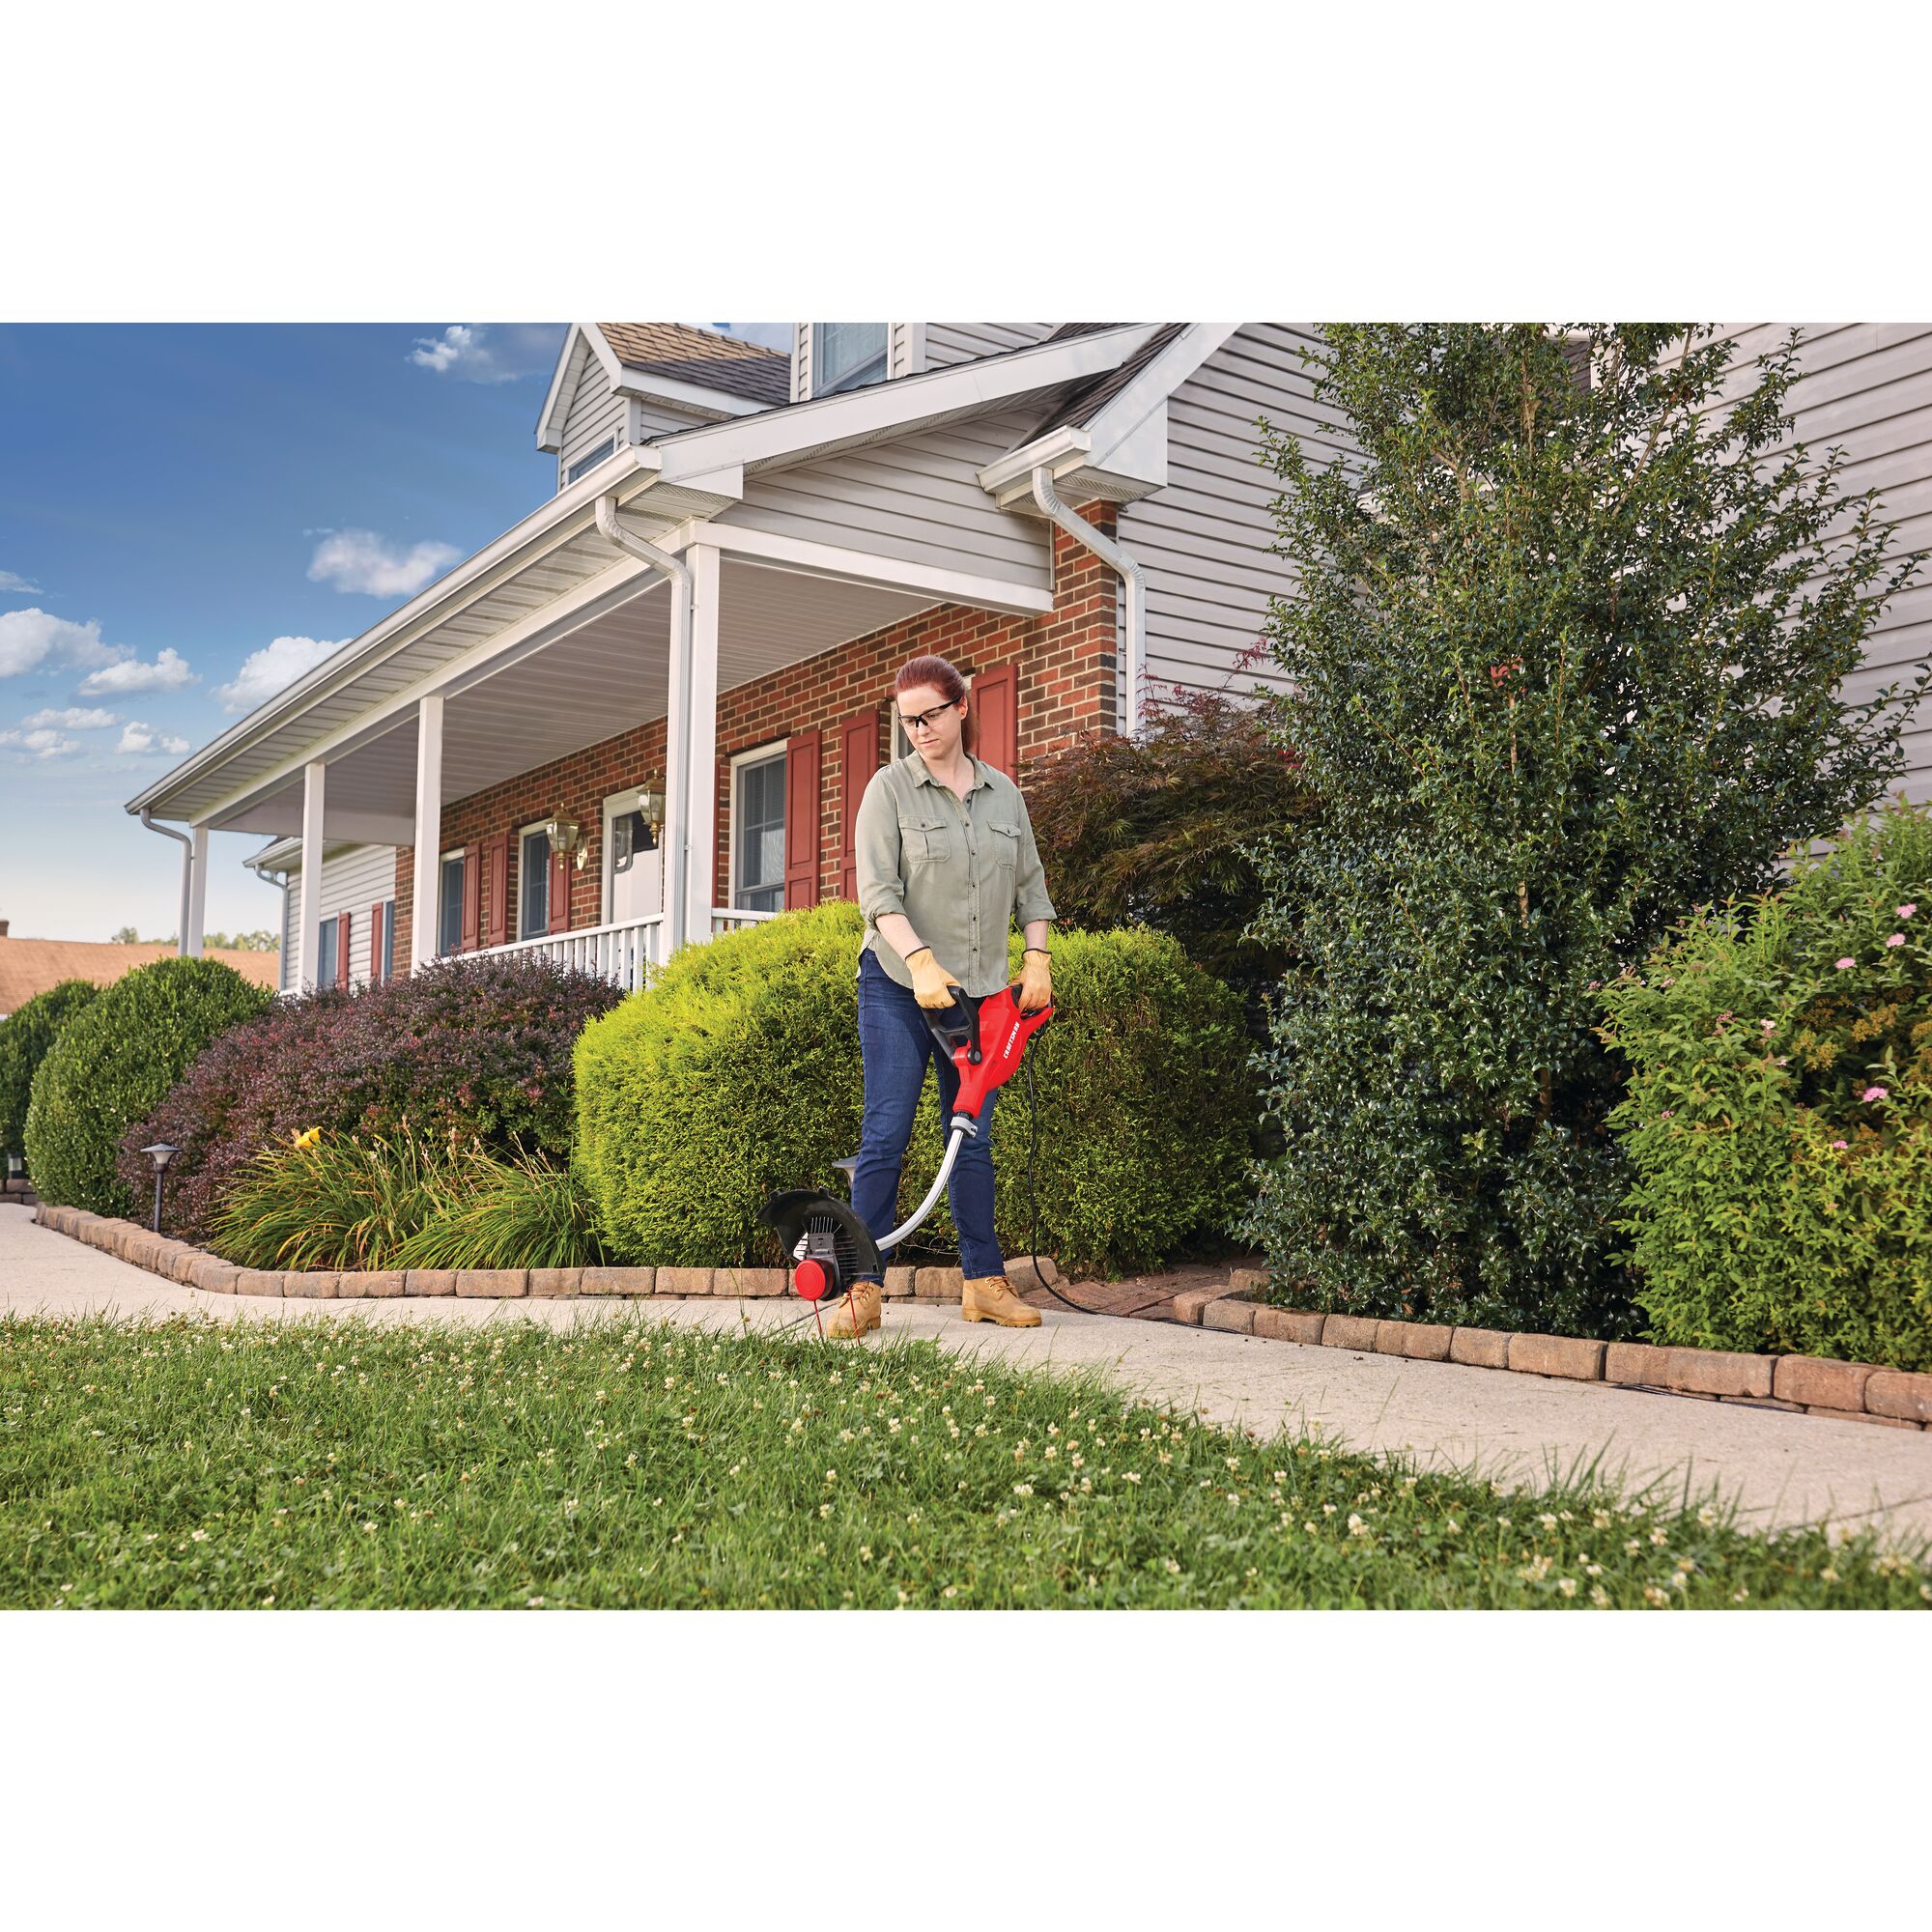 Weedwacker 8.5 amp 14 inch corded electric string trimmer being used by a person to trim grass.